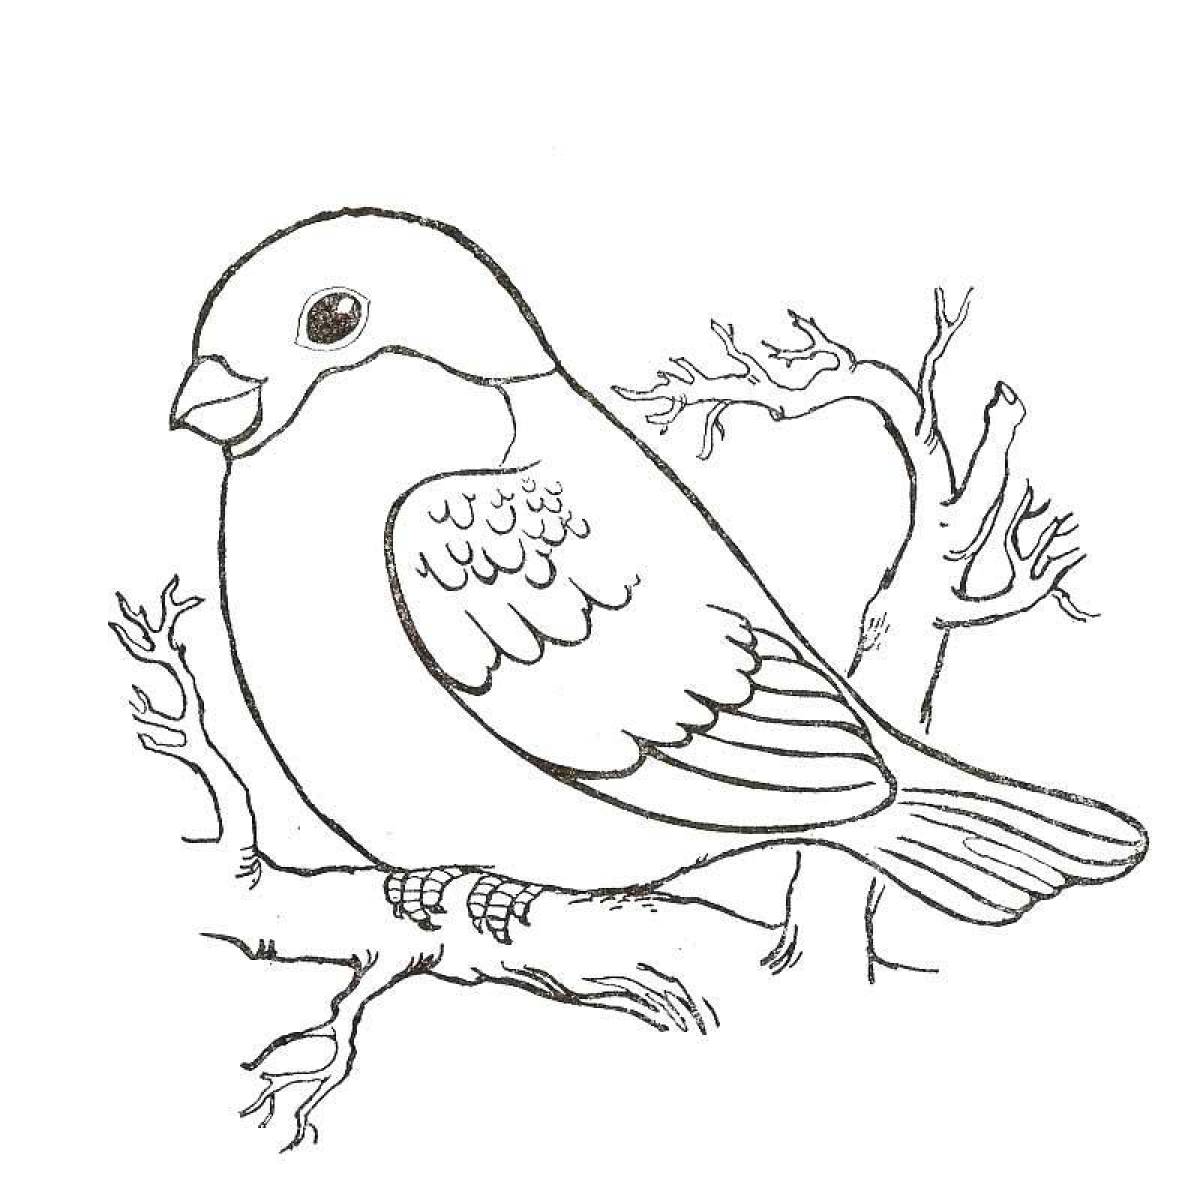 Playful winter birds coloring book for children 6-7 years old